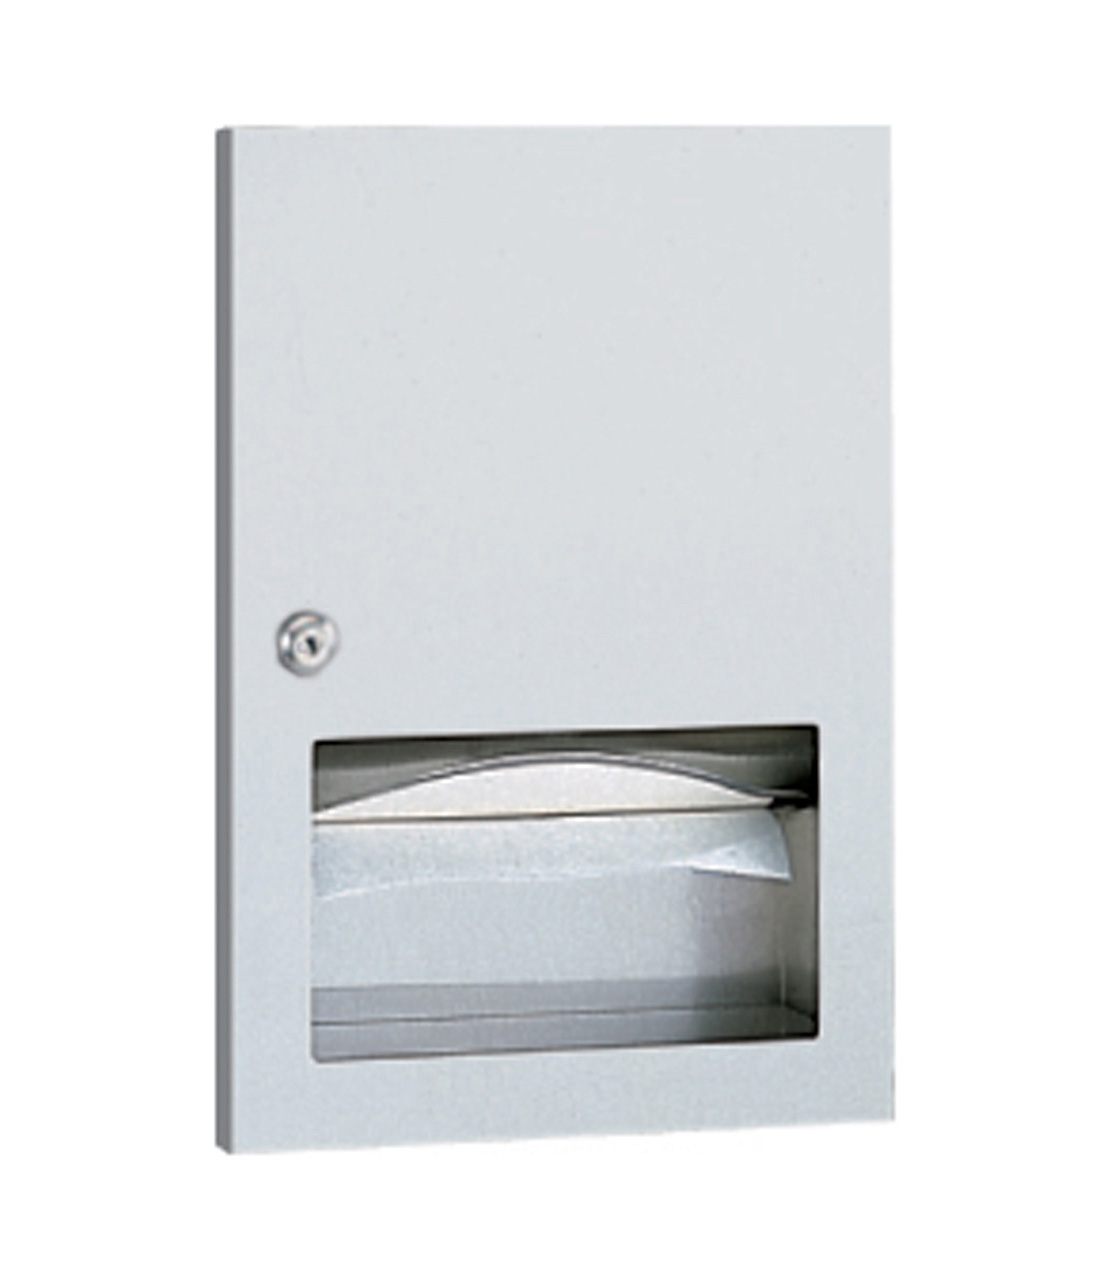 Coverall Recessed Towel Dispenser - (Model #: td-6f) Image